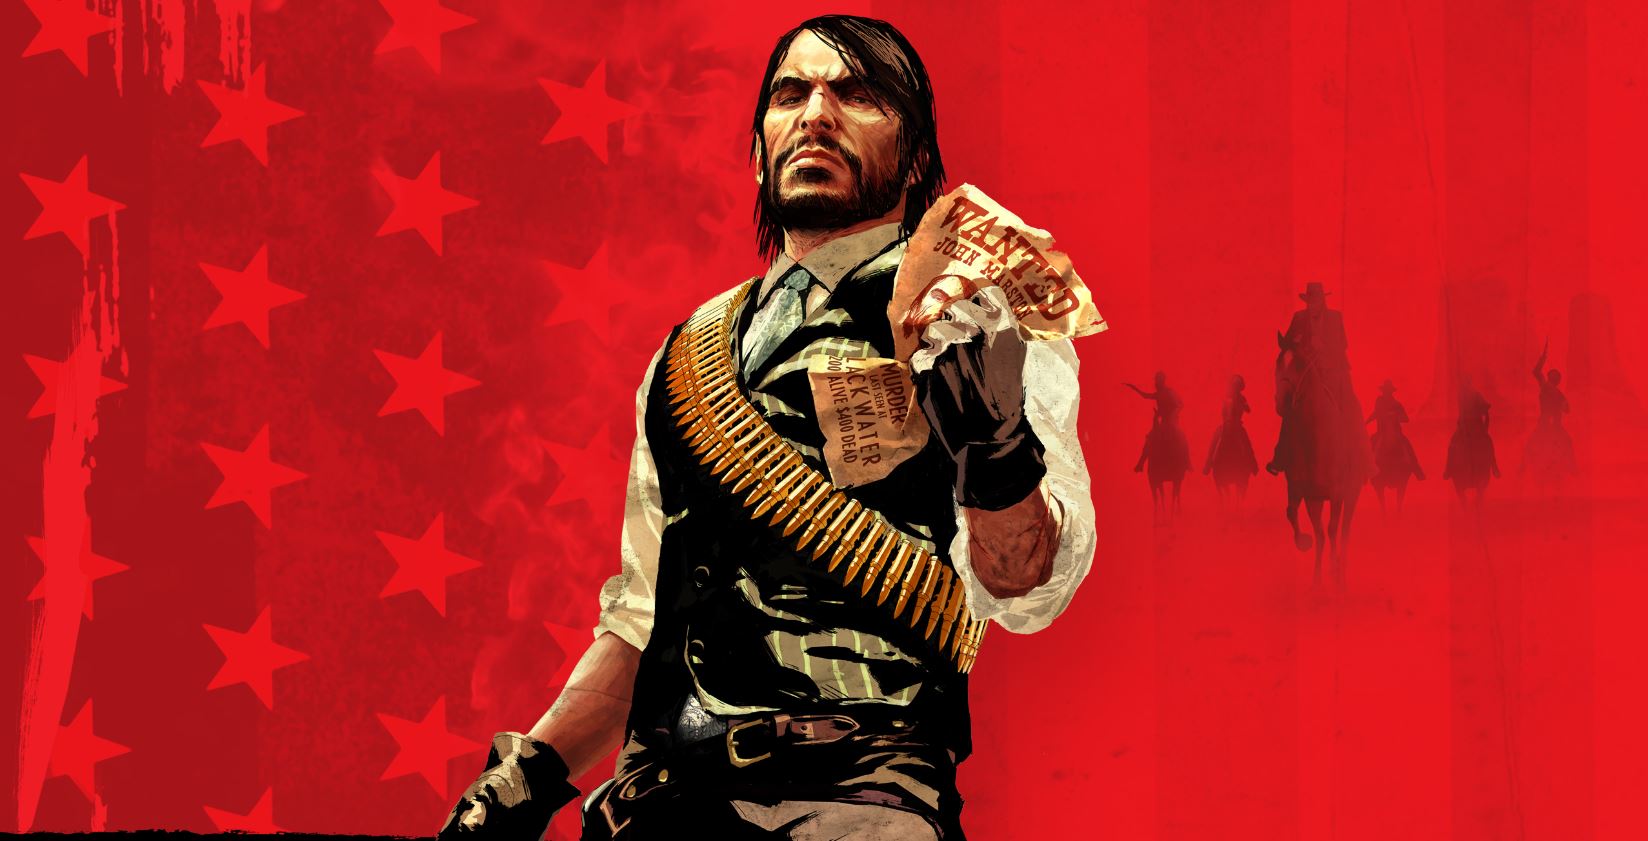 Red Dead Redemption coming to PS4 and Nintendo Switch later this month